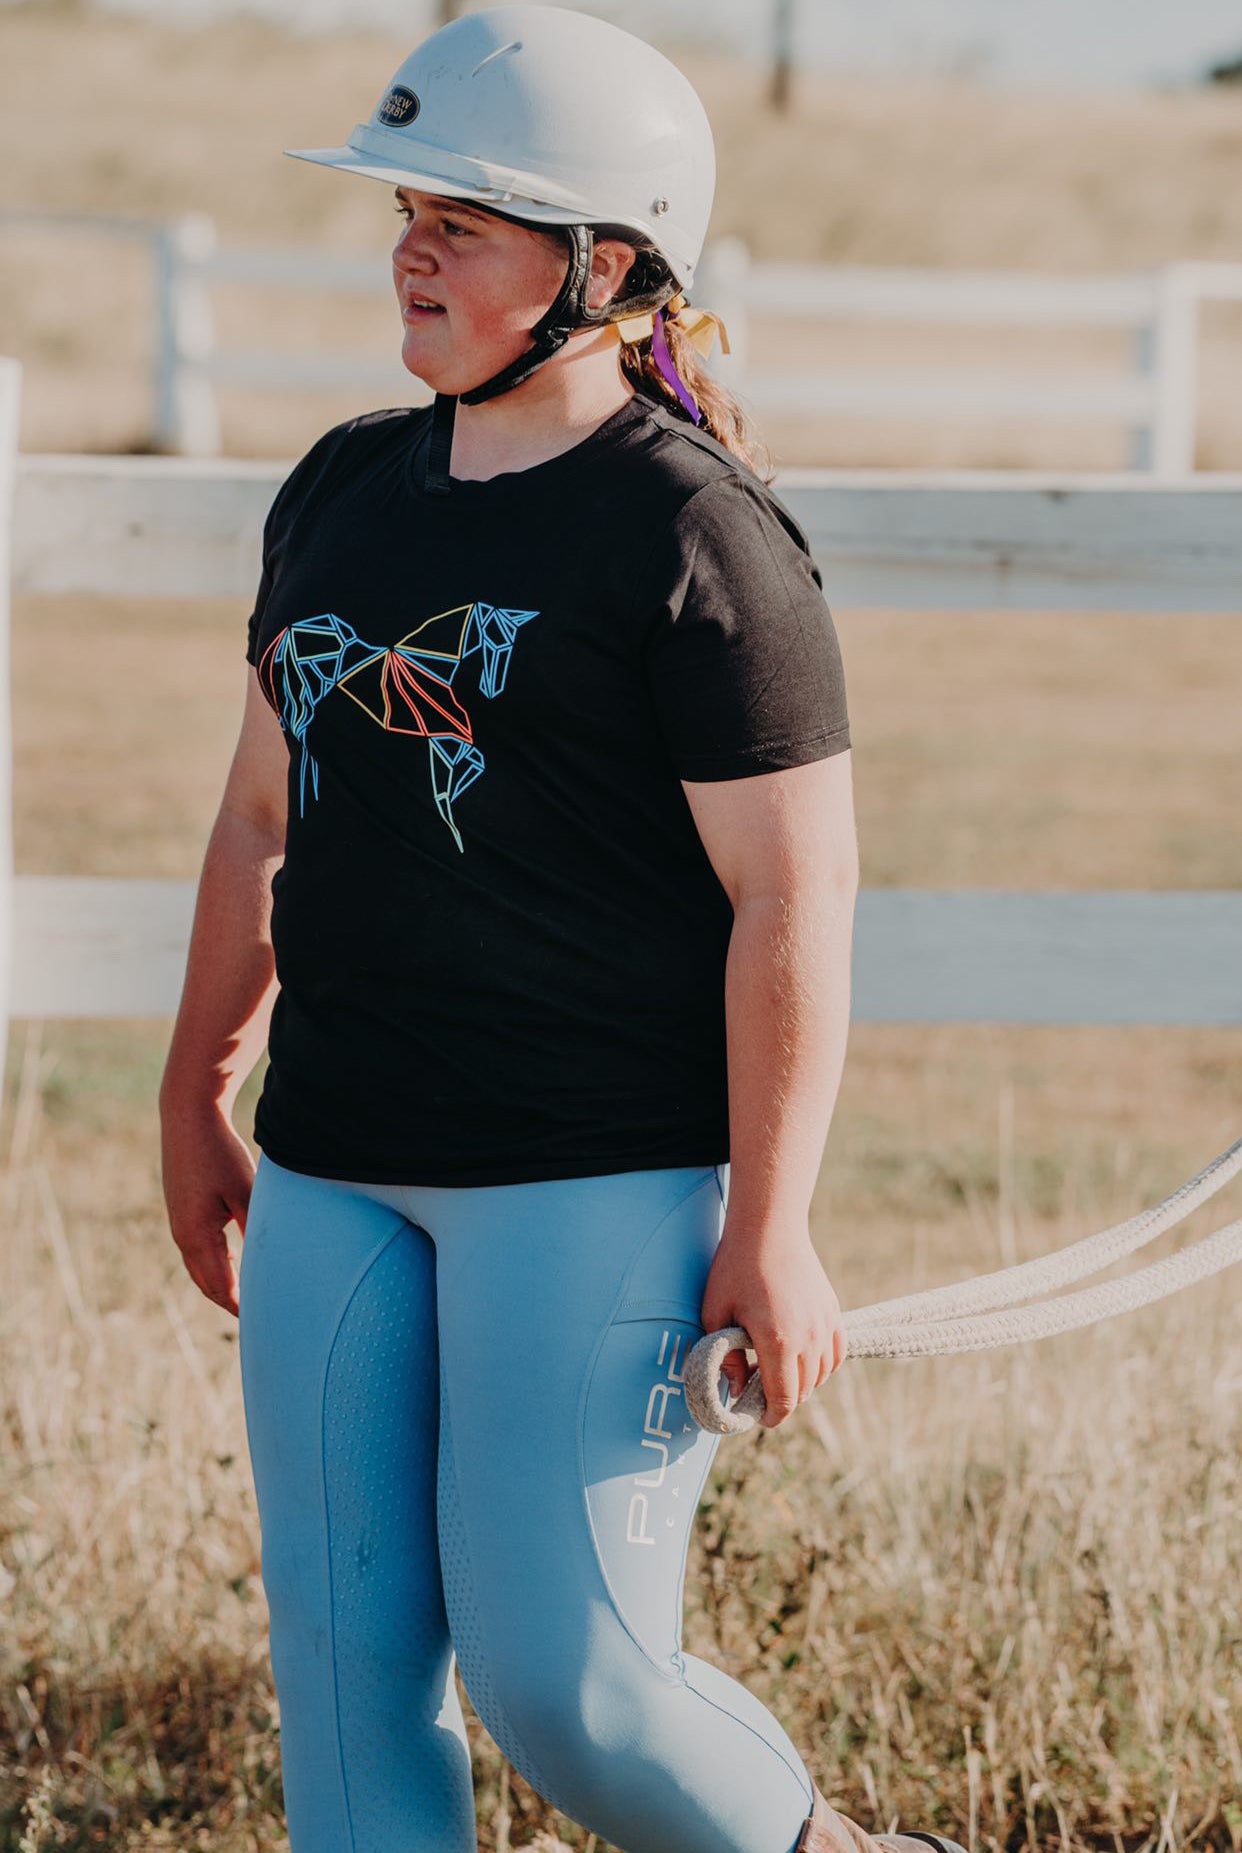 A young person with long hair stands outdoors wearing a white helmet, black Pure Canter Youth PURE Emblem Shirt – a true wardrobe staple – and light blue pants. They hold a rope in their left hand. In the background, there is a white fence and a grassy field.